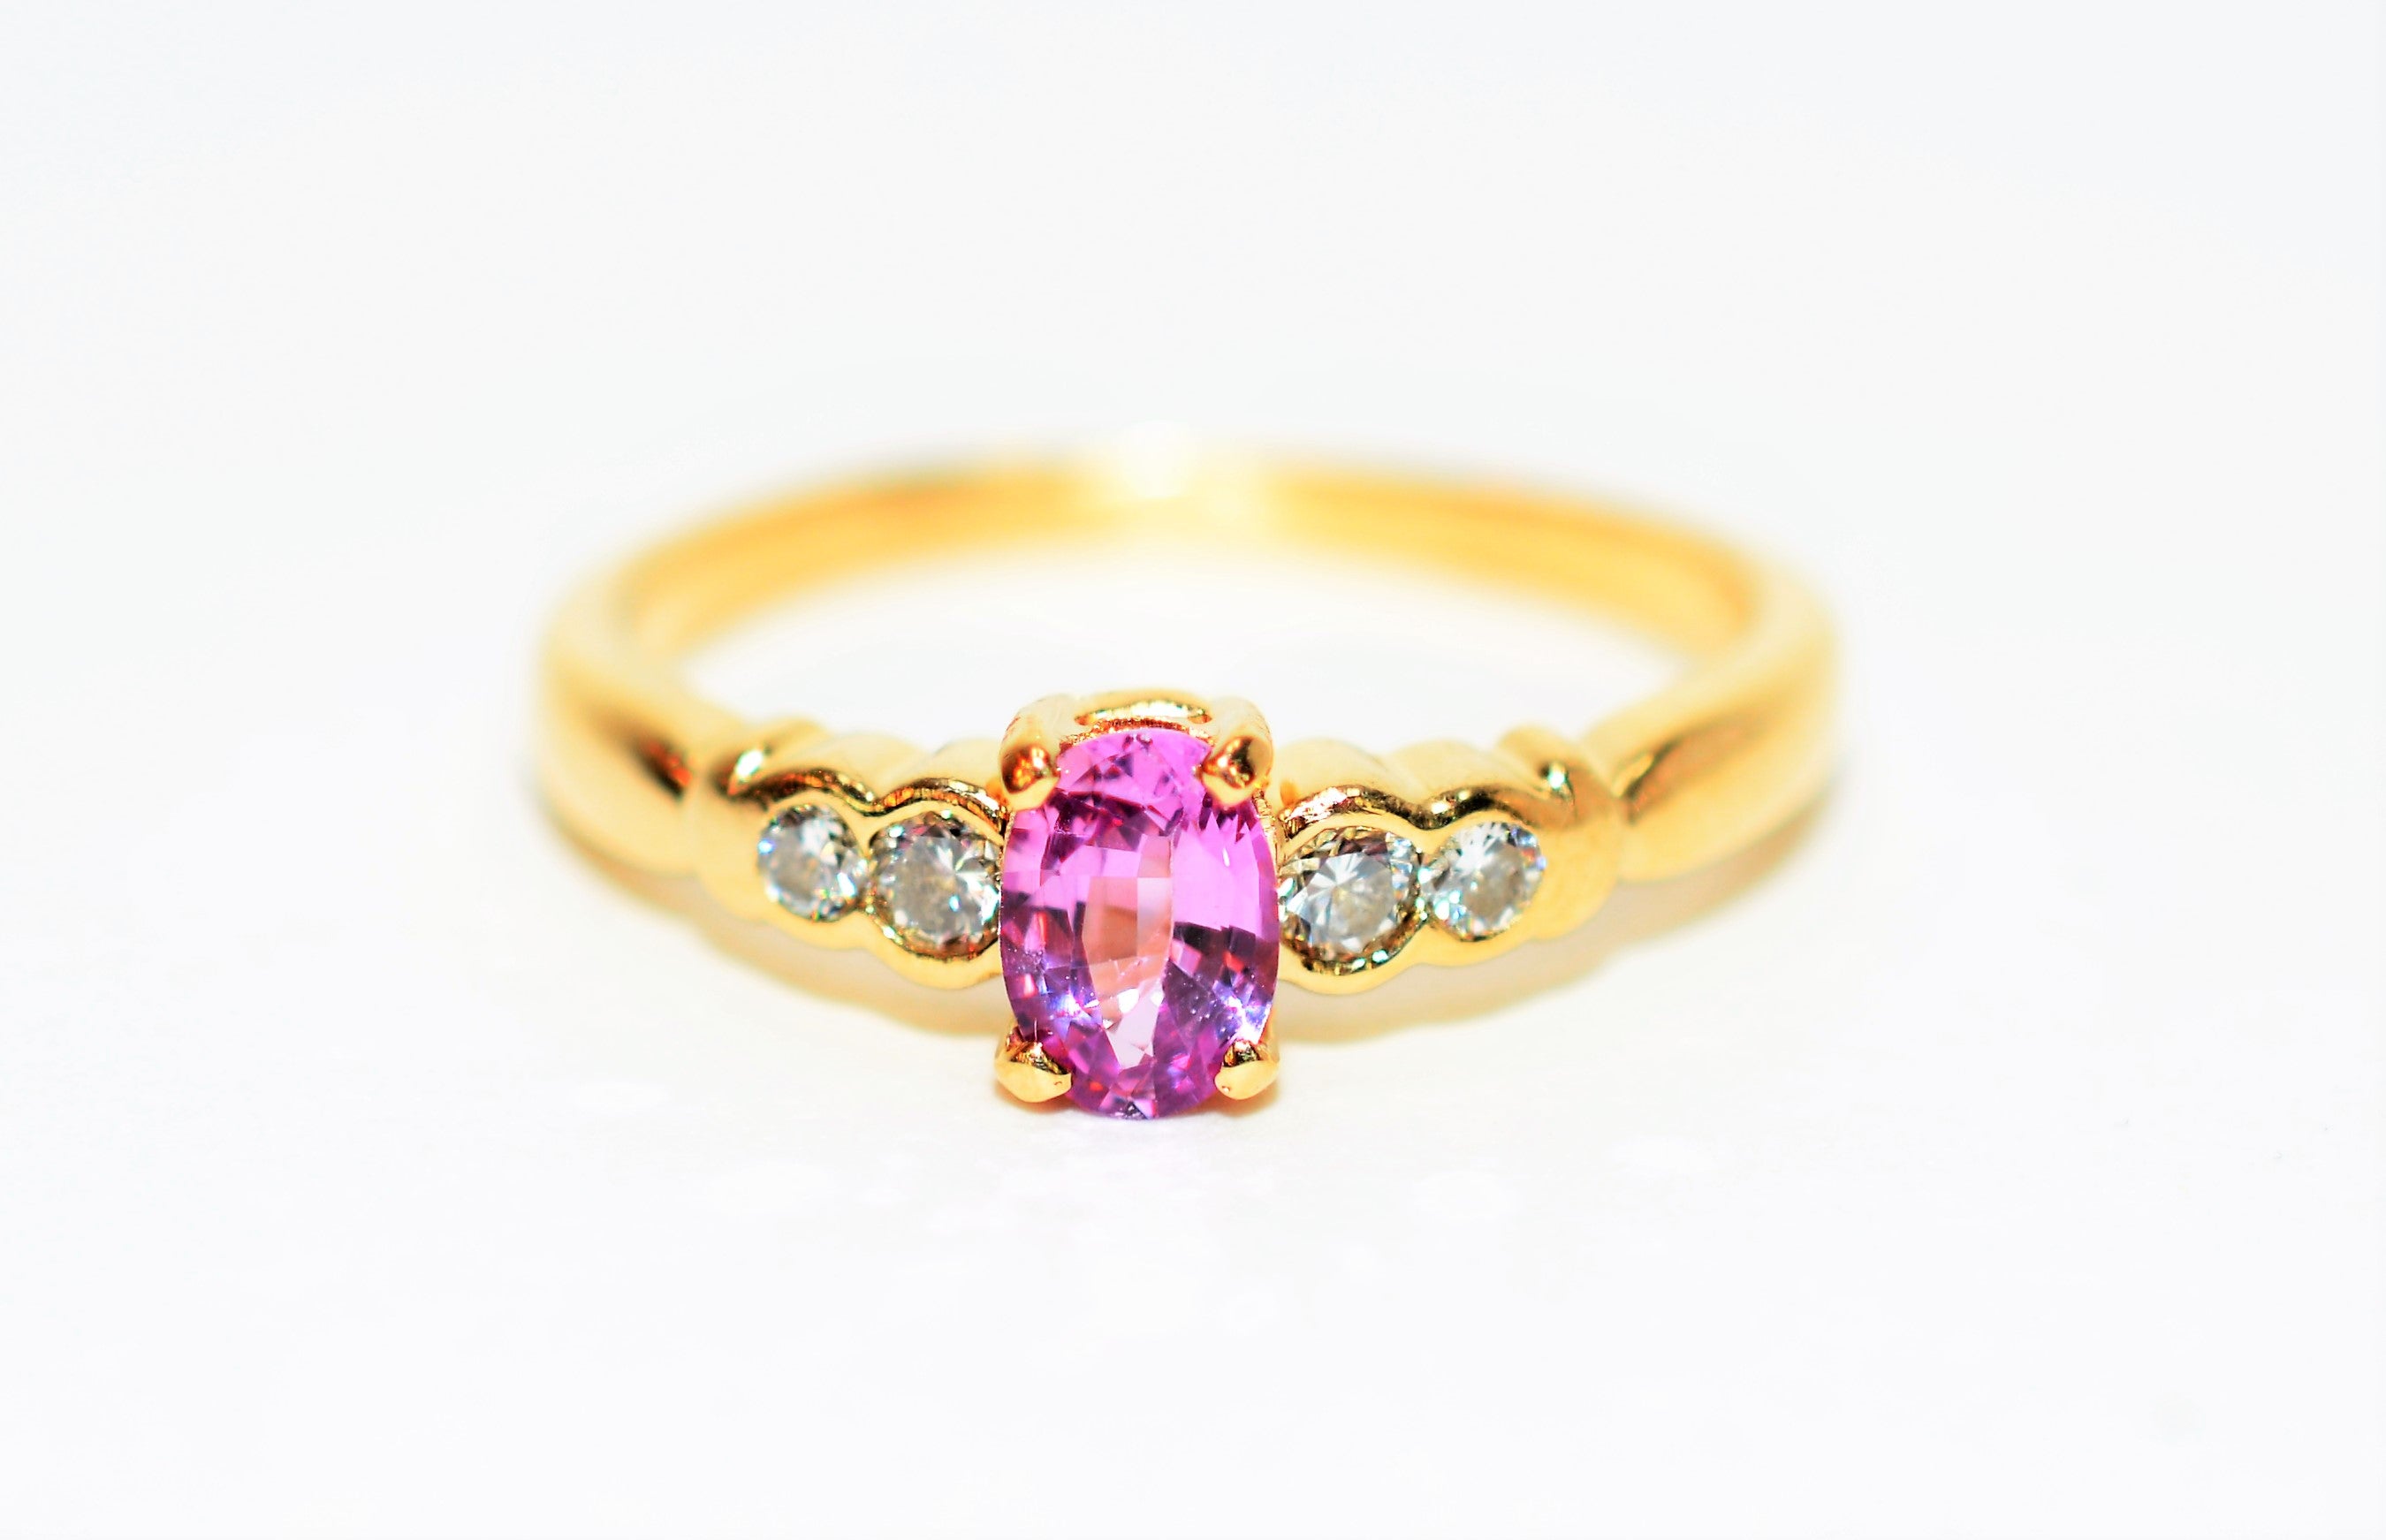 Certified Natural Padparadscha Sapphire & Diamond Ring 14K Solid Gold .56tcw Gemstone Ring Statement Ring Engagement Ring Bridal Jewelry